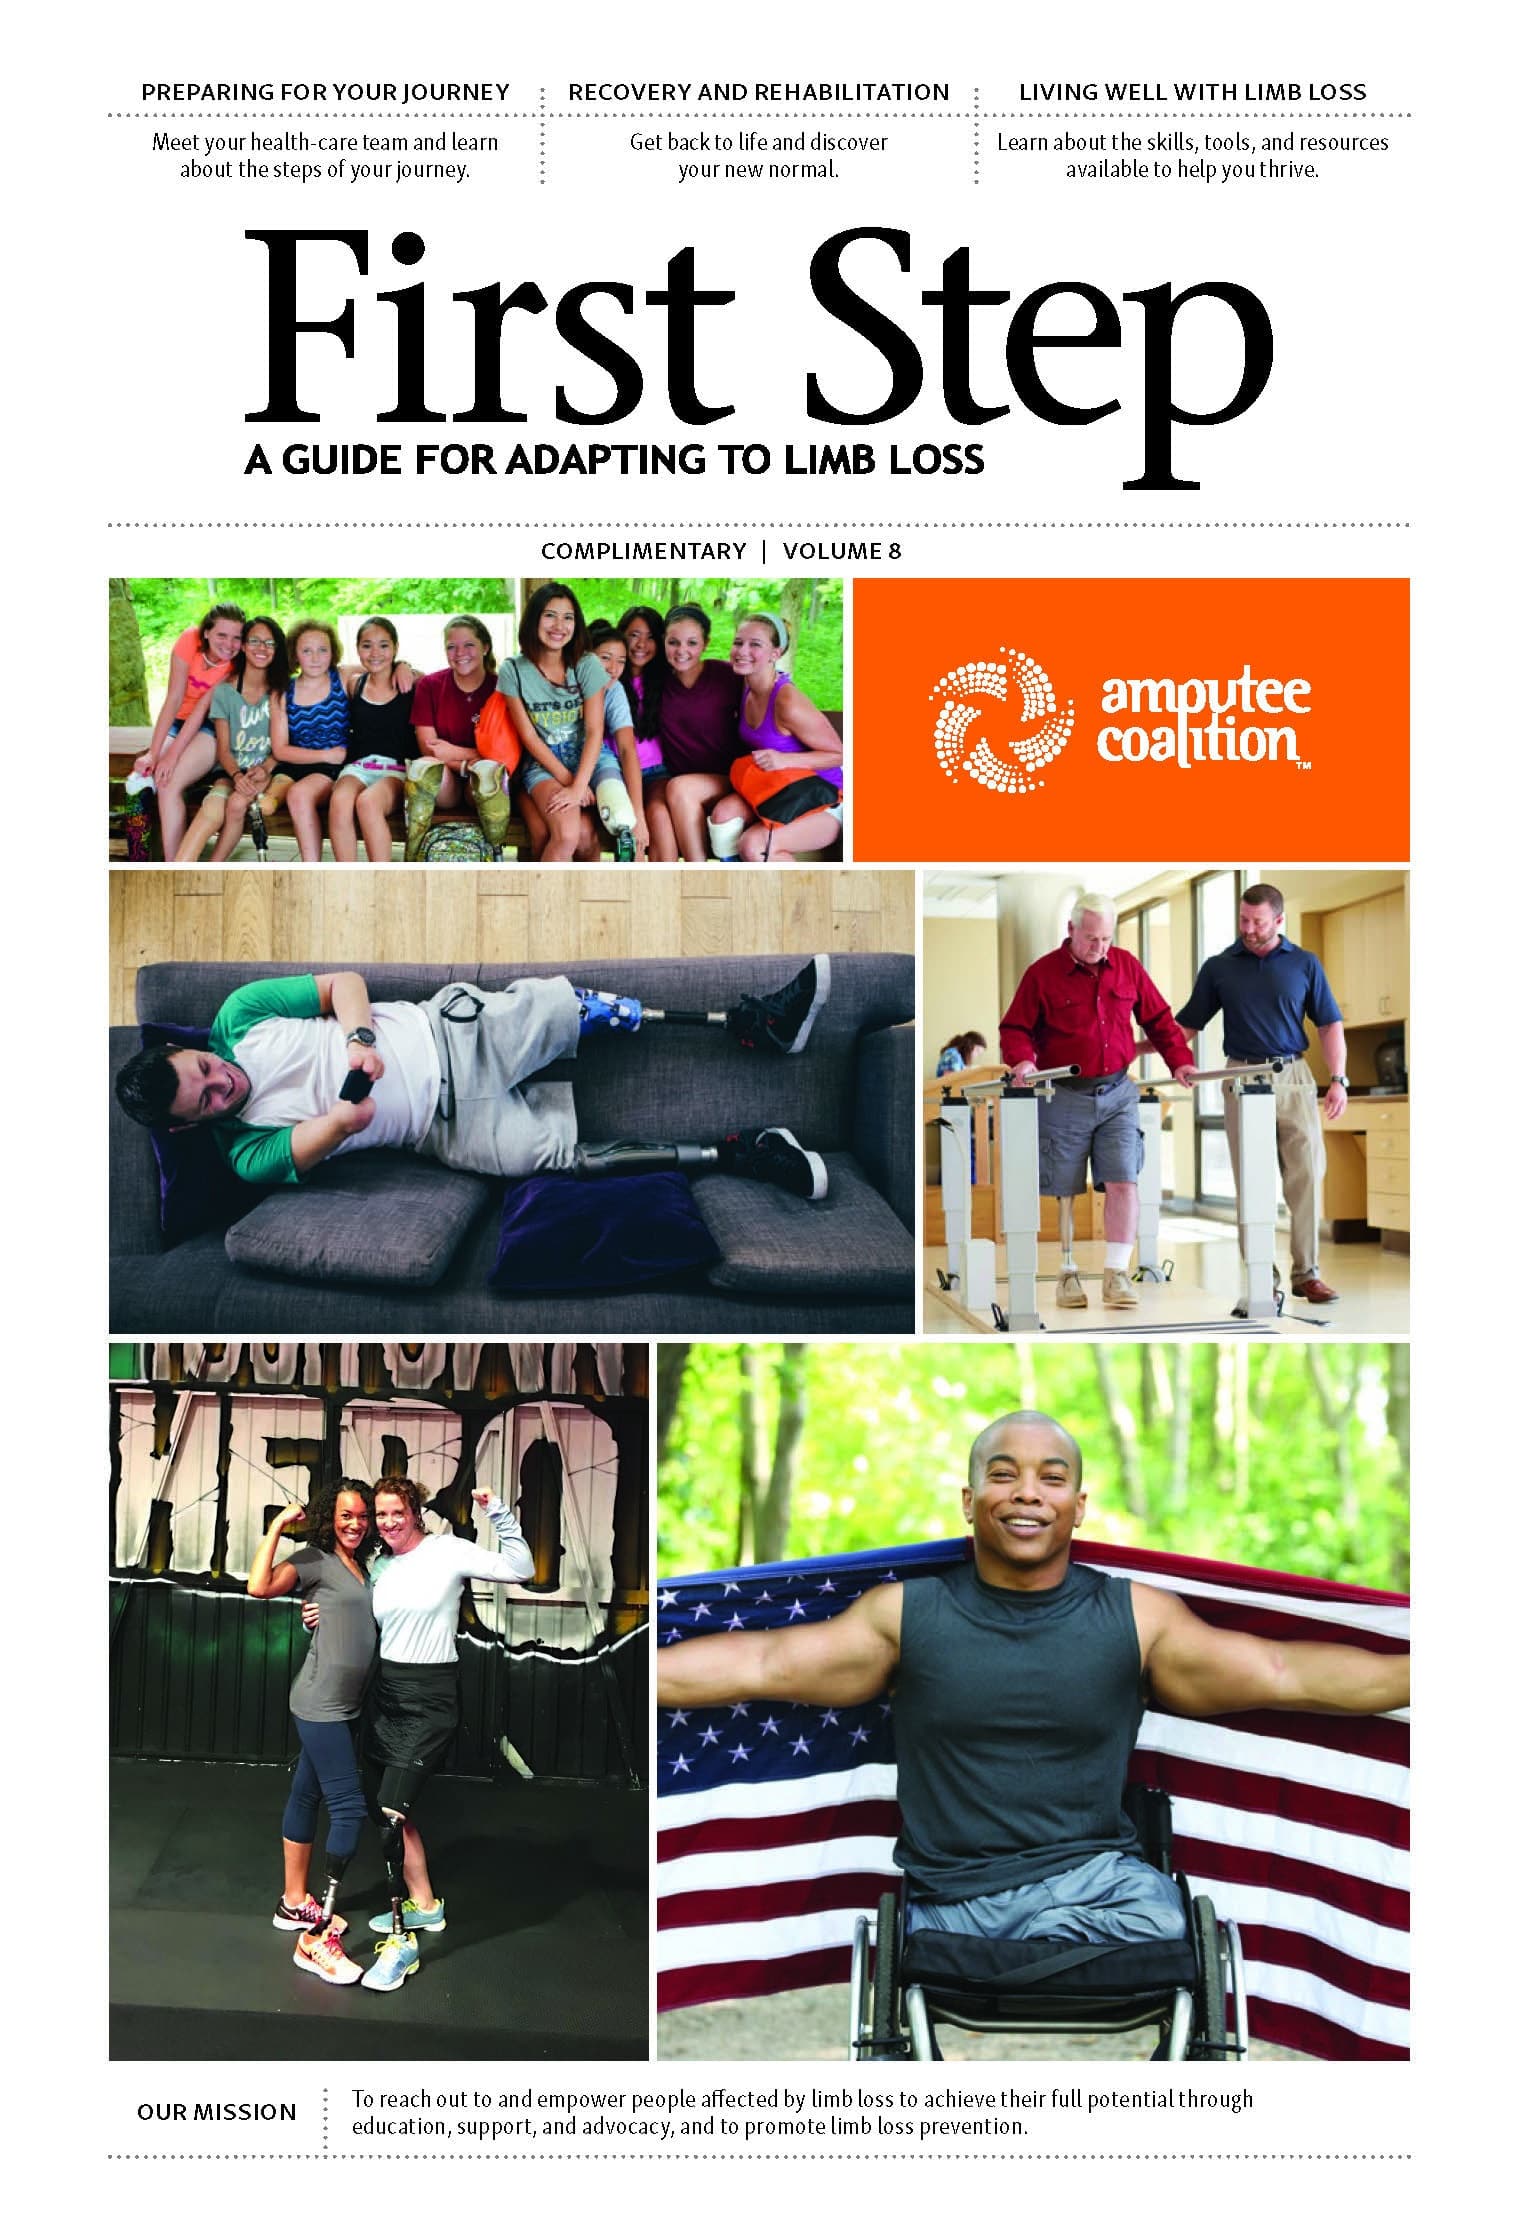 First Step - A Guide For Adapting To Limb Loss